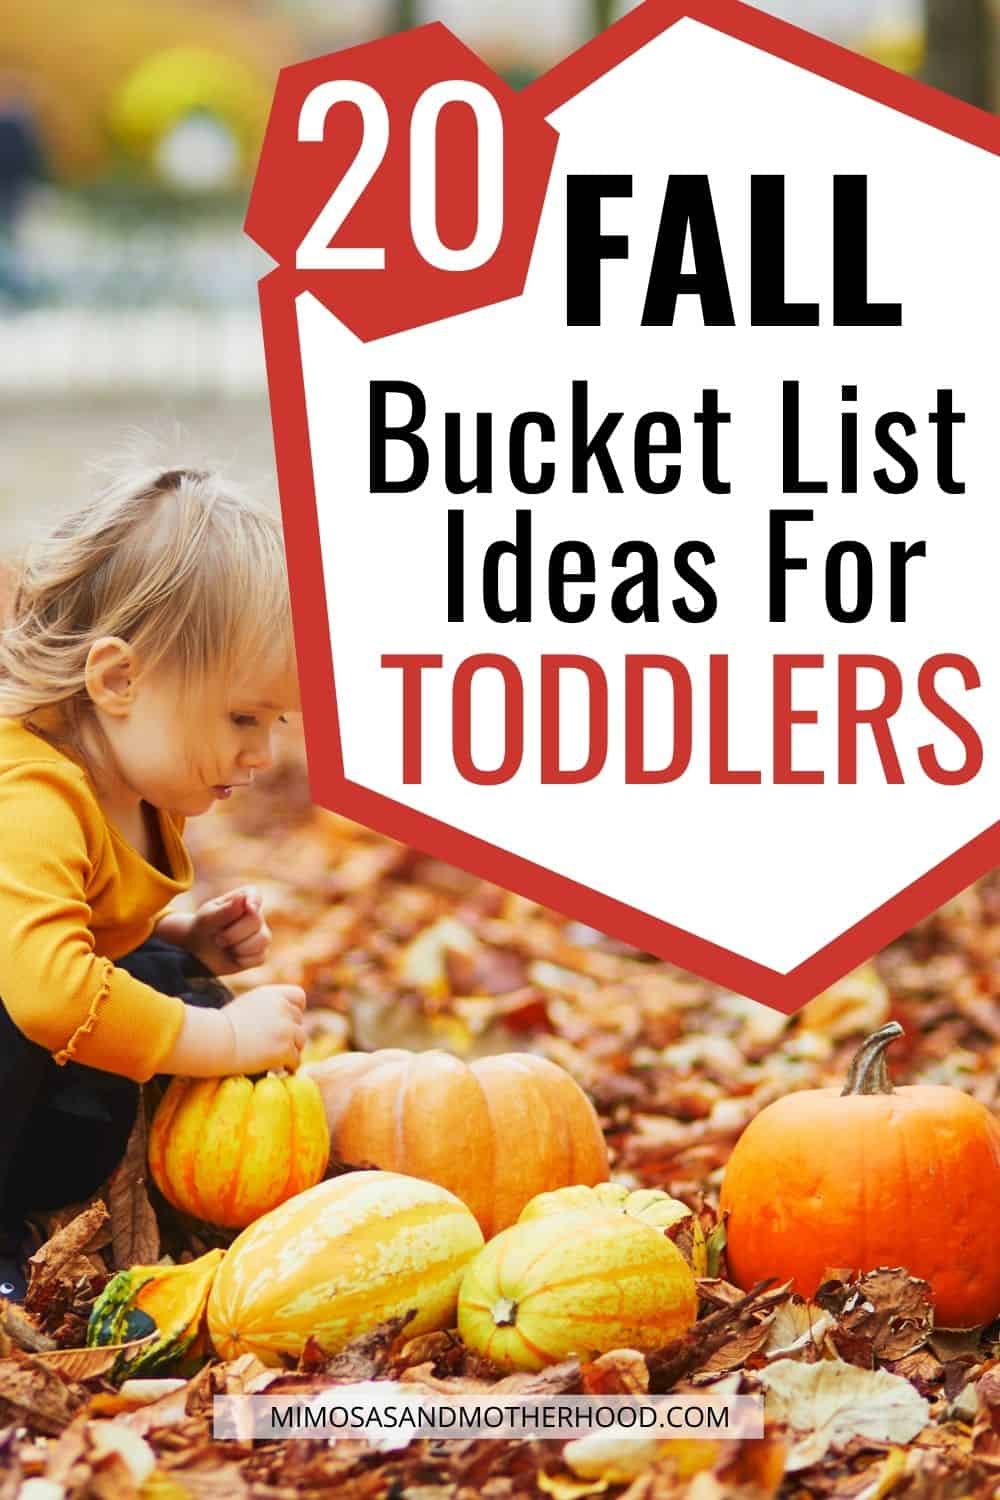 20 Fall Bucket List Ideas for Toddlers